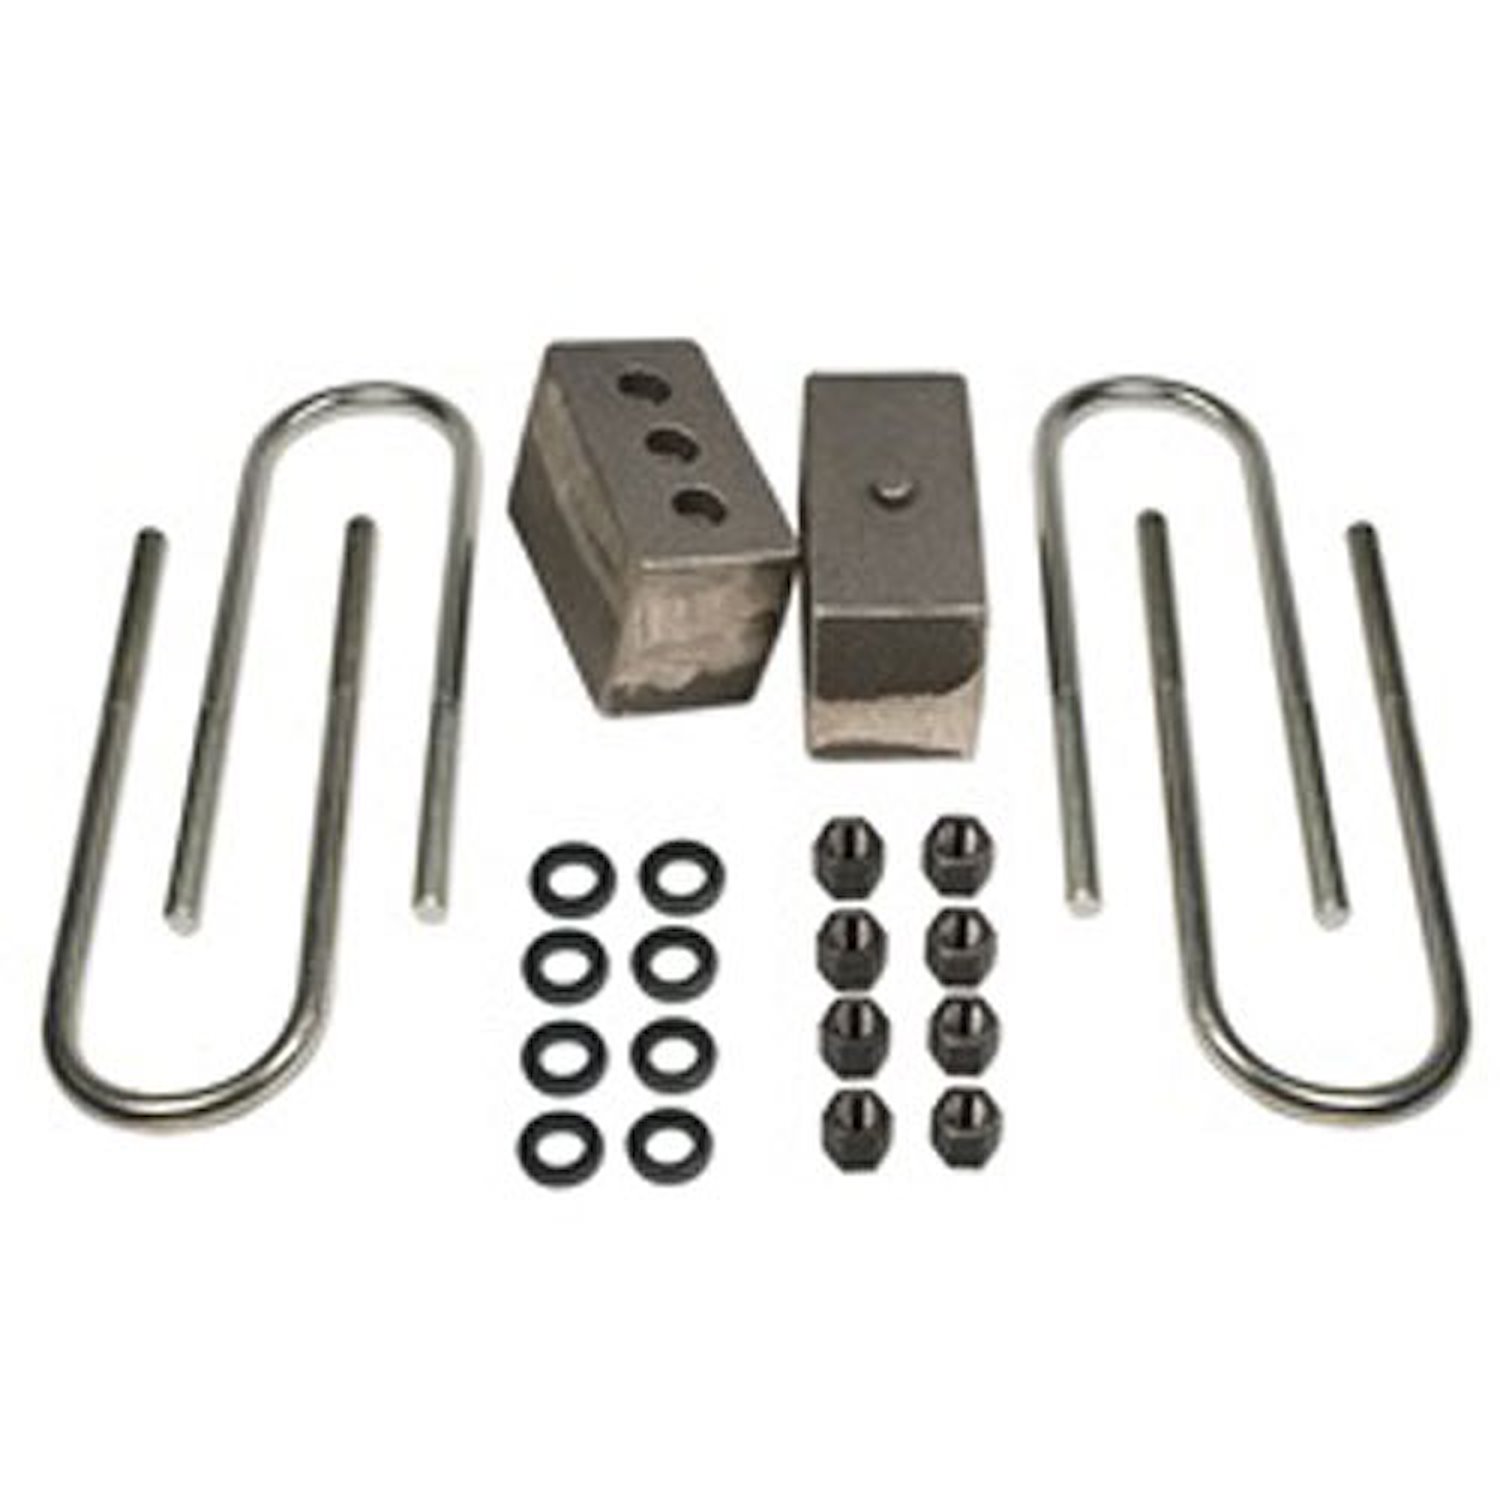 Axle Lift Blocks Kit 4 in. H x 3 in. W x 5.75 in. L Tapered For Vehicles w/4 in. Rear Axle Tube Dual Pinned Incl. U-Bolts